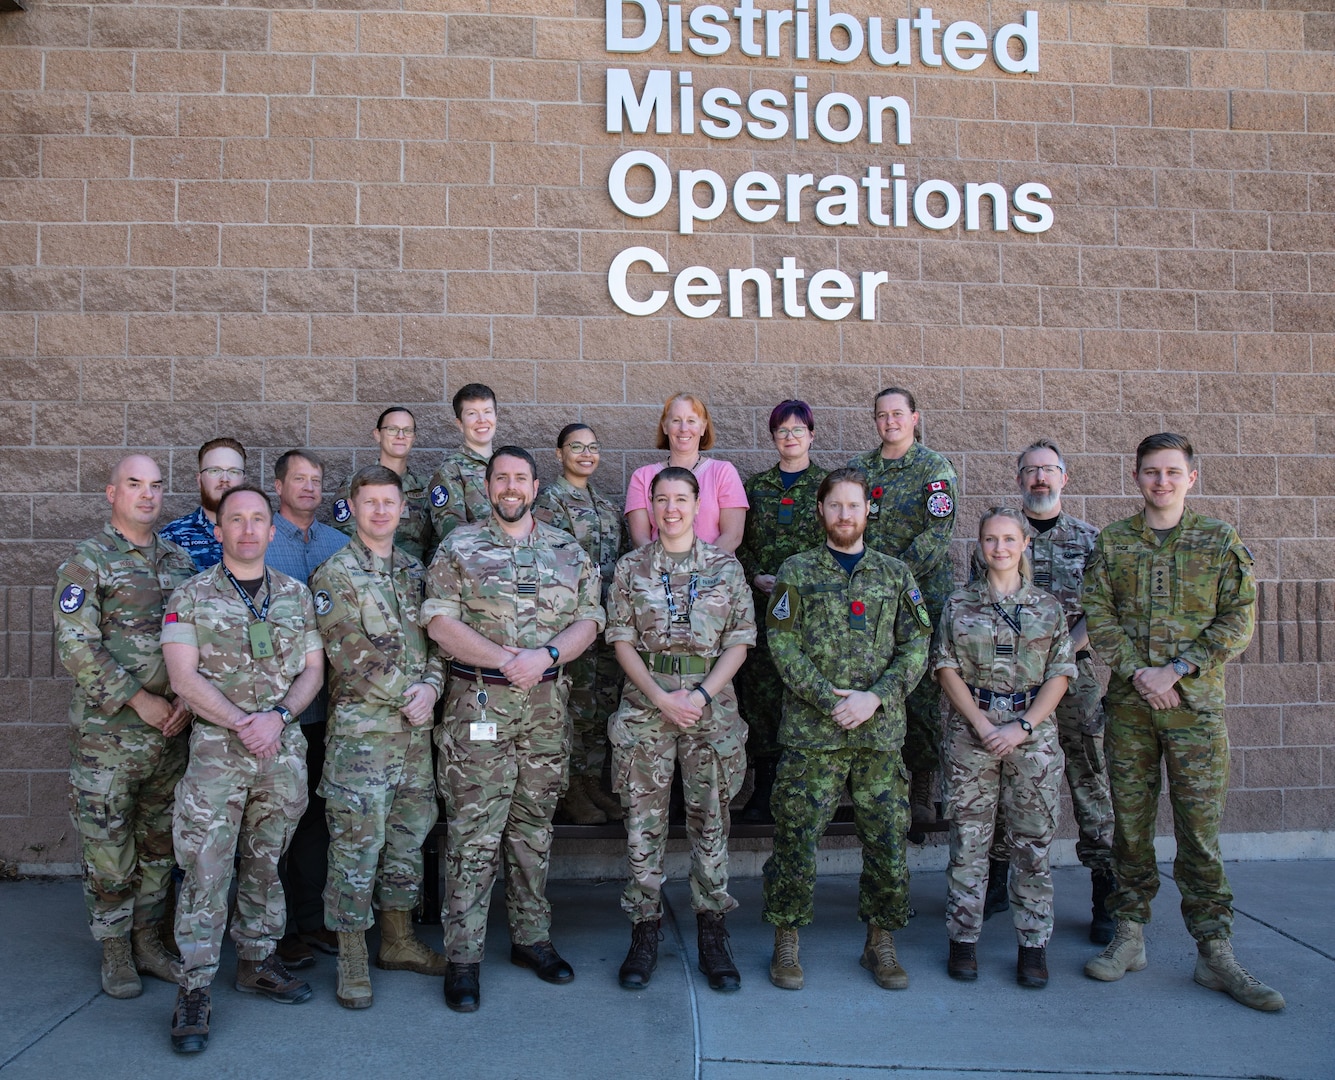 uniformed U.S., U.K. Australian and Canadian military members stand in front of brick building with lettering “942 Distributed Mission Operations Center”